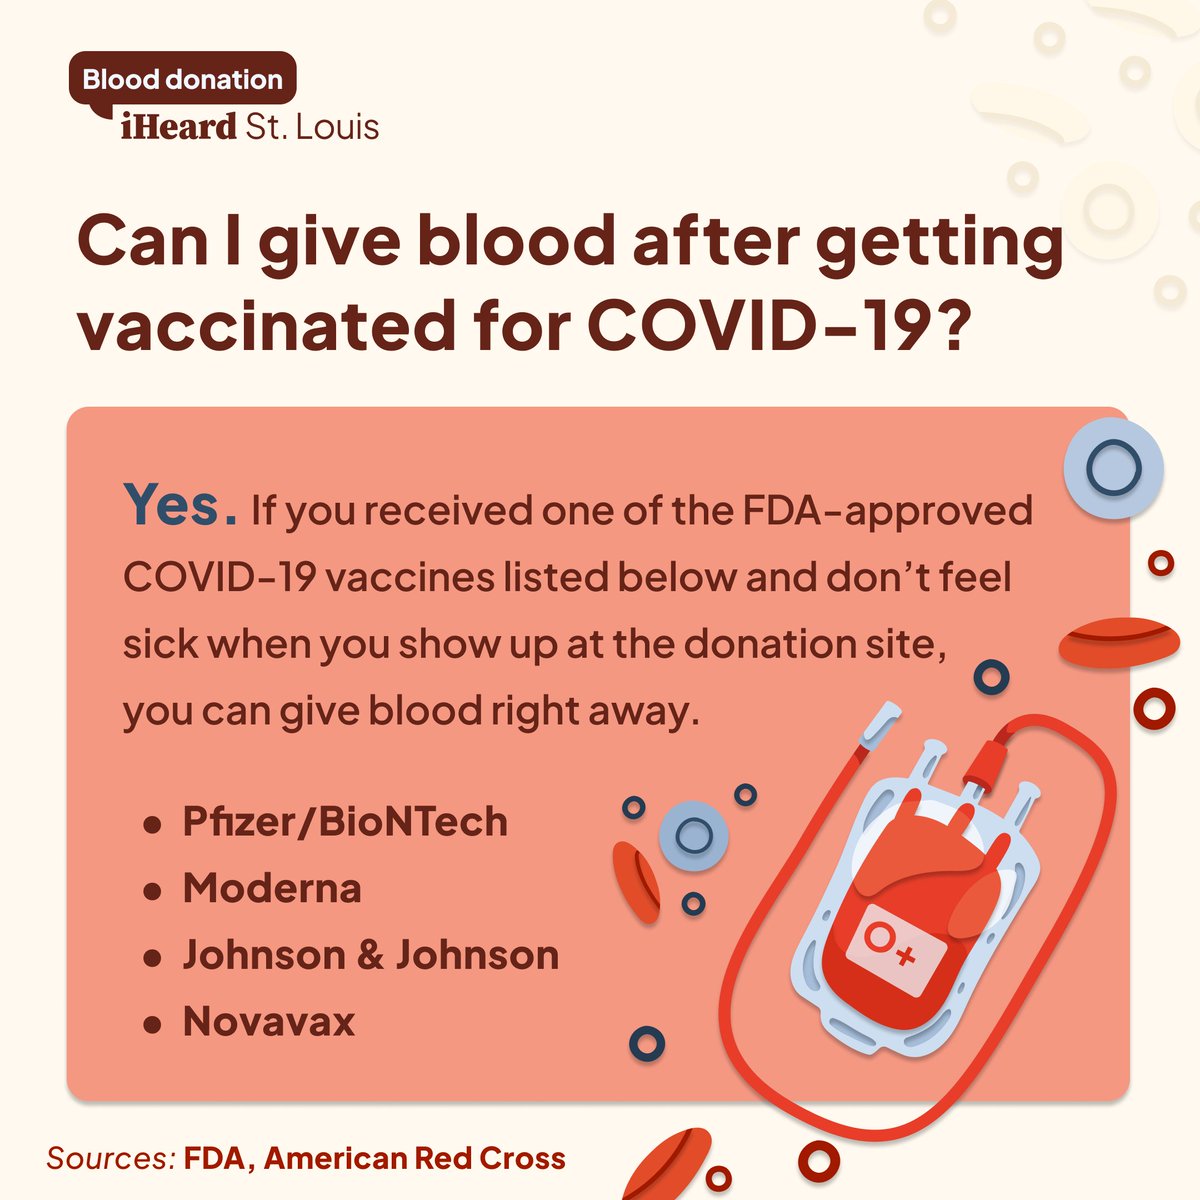 Blood donation after COVID vaccination is safe and can help save a person’s life. If the vaccine is FDA-approved & you don’t feel sick, you can give blood right away. Schedule your appt at RedCrossBlood.org or call 1-800-733-2767. #iHeardSTL #DonateBlood #COVIDVaccination